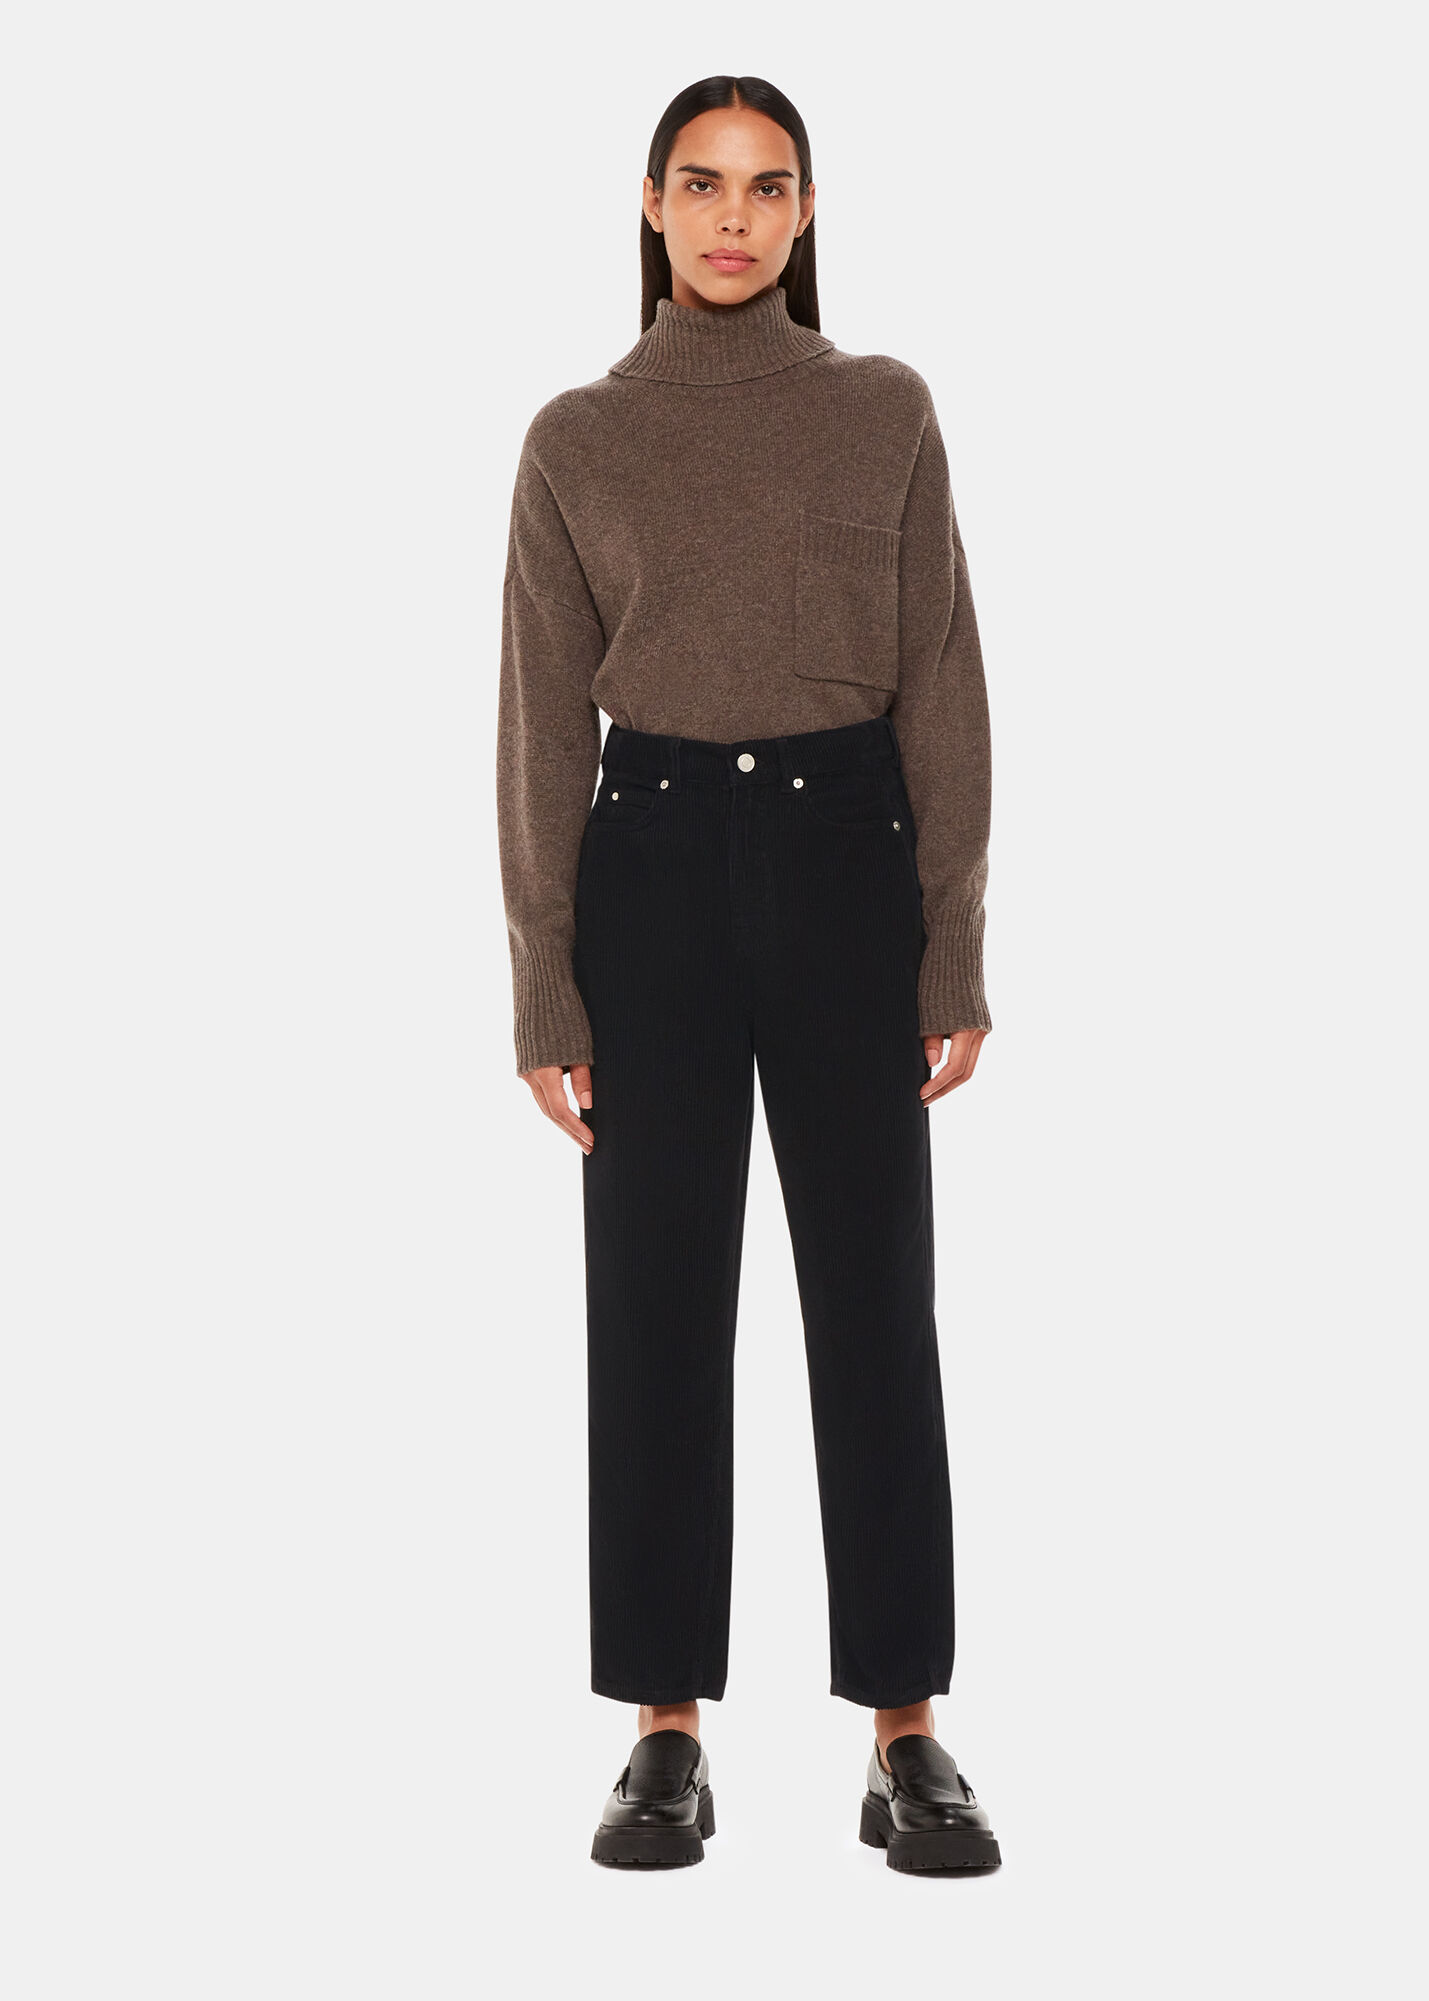 Shop HighWaist Corduroy Pants for Women from latest collection at Forever  21  332498